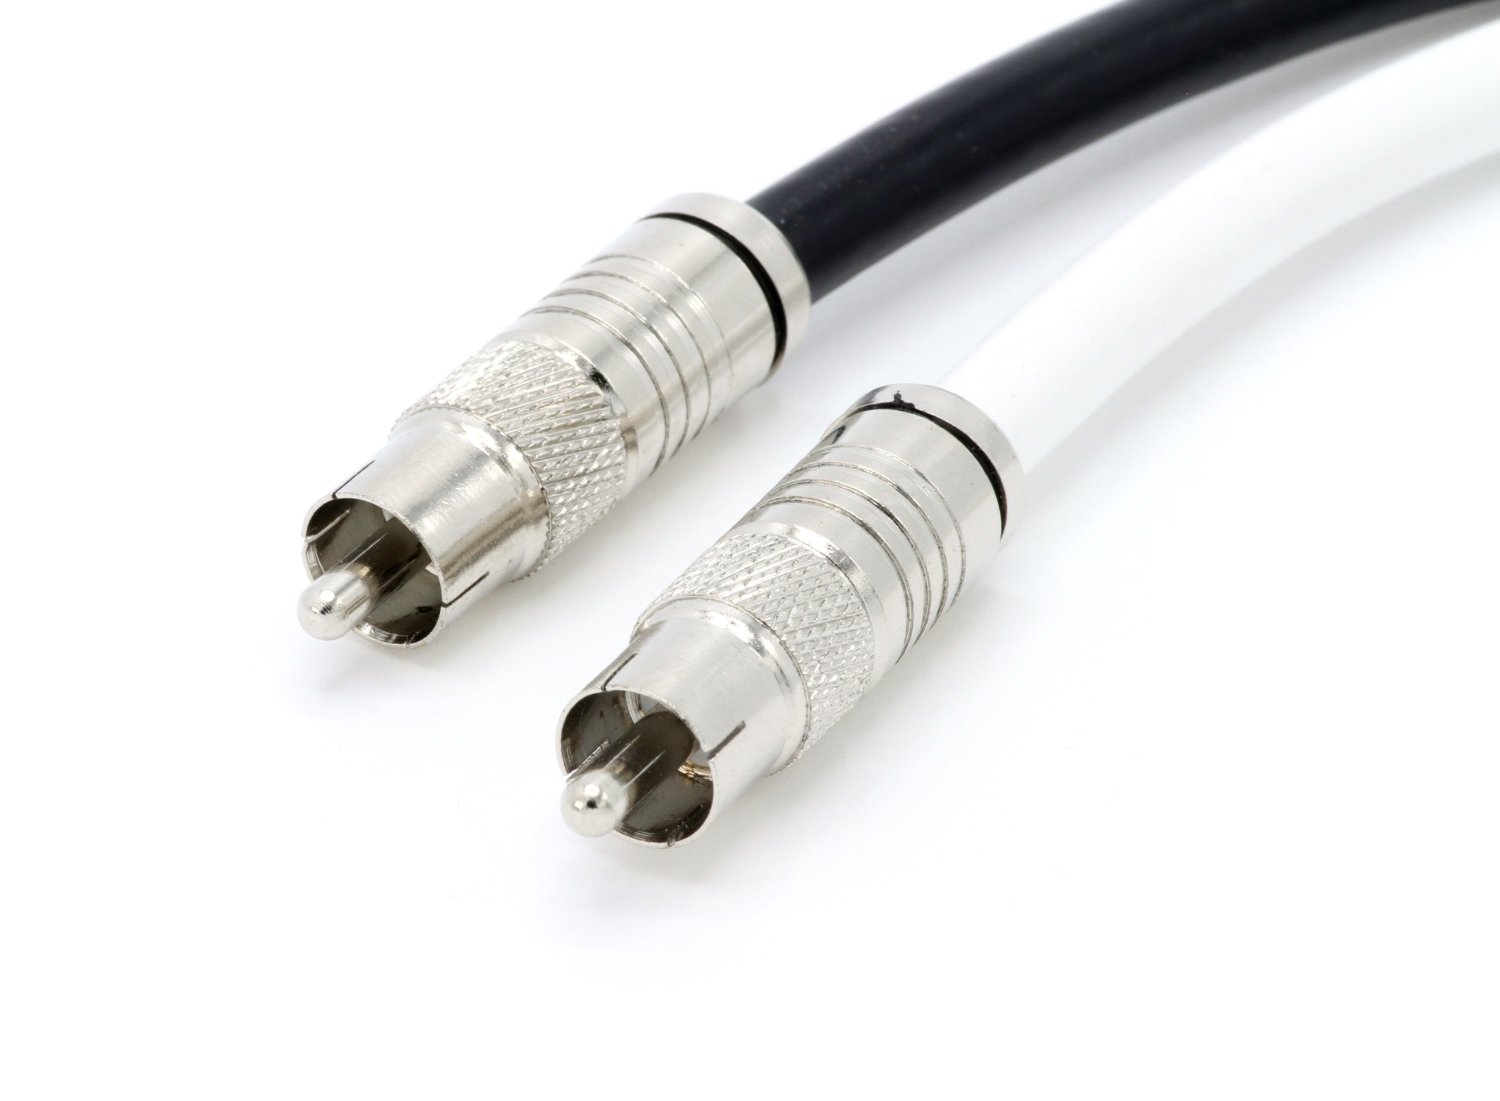 THE CIMPLE CO - Digital Audio Coaxial Cable - Subwoofer Cable - (S/PDIF) RCA Cable, 200 Feet - image 5 of 6